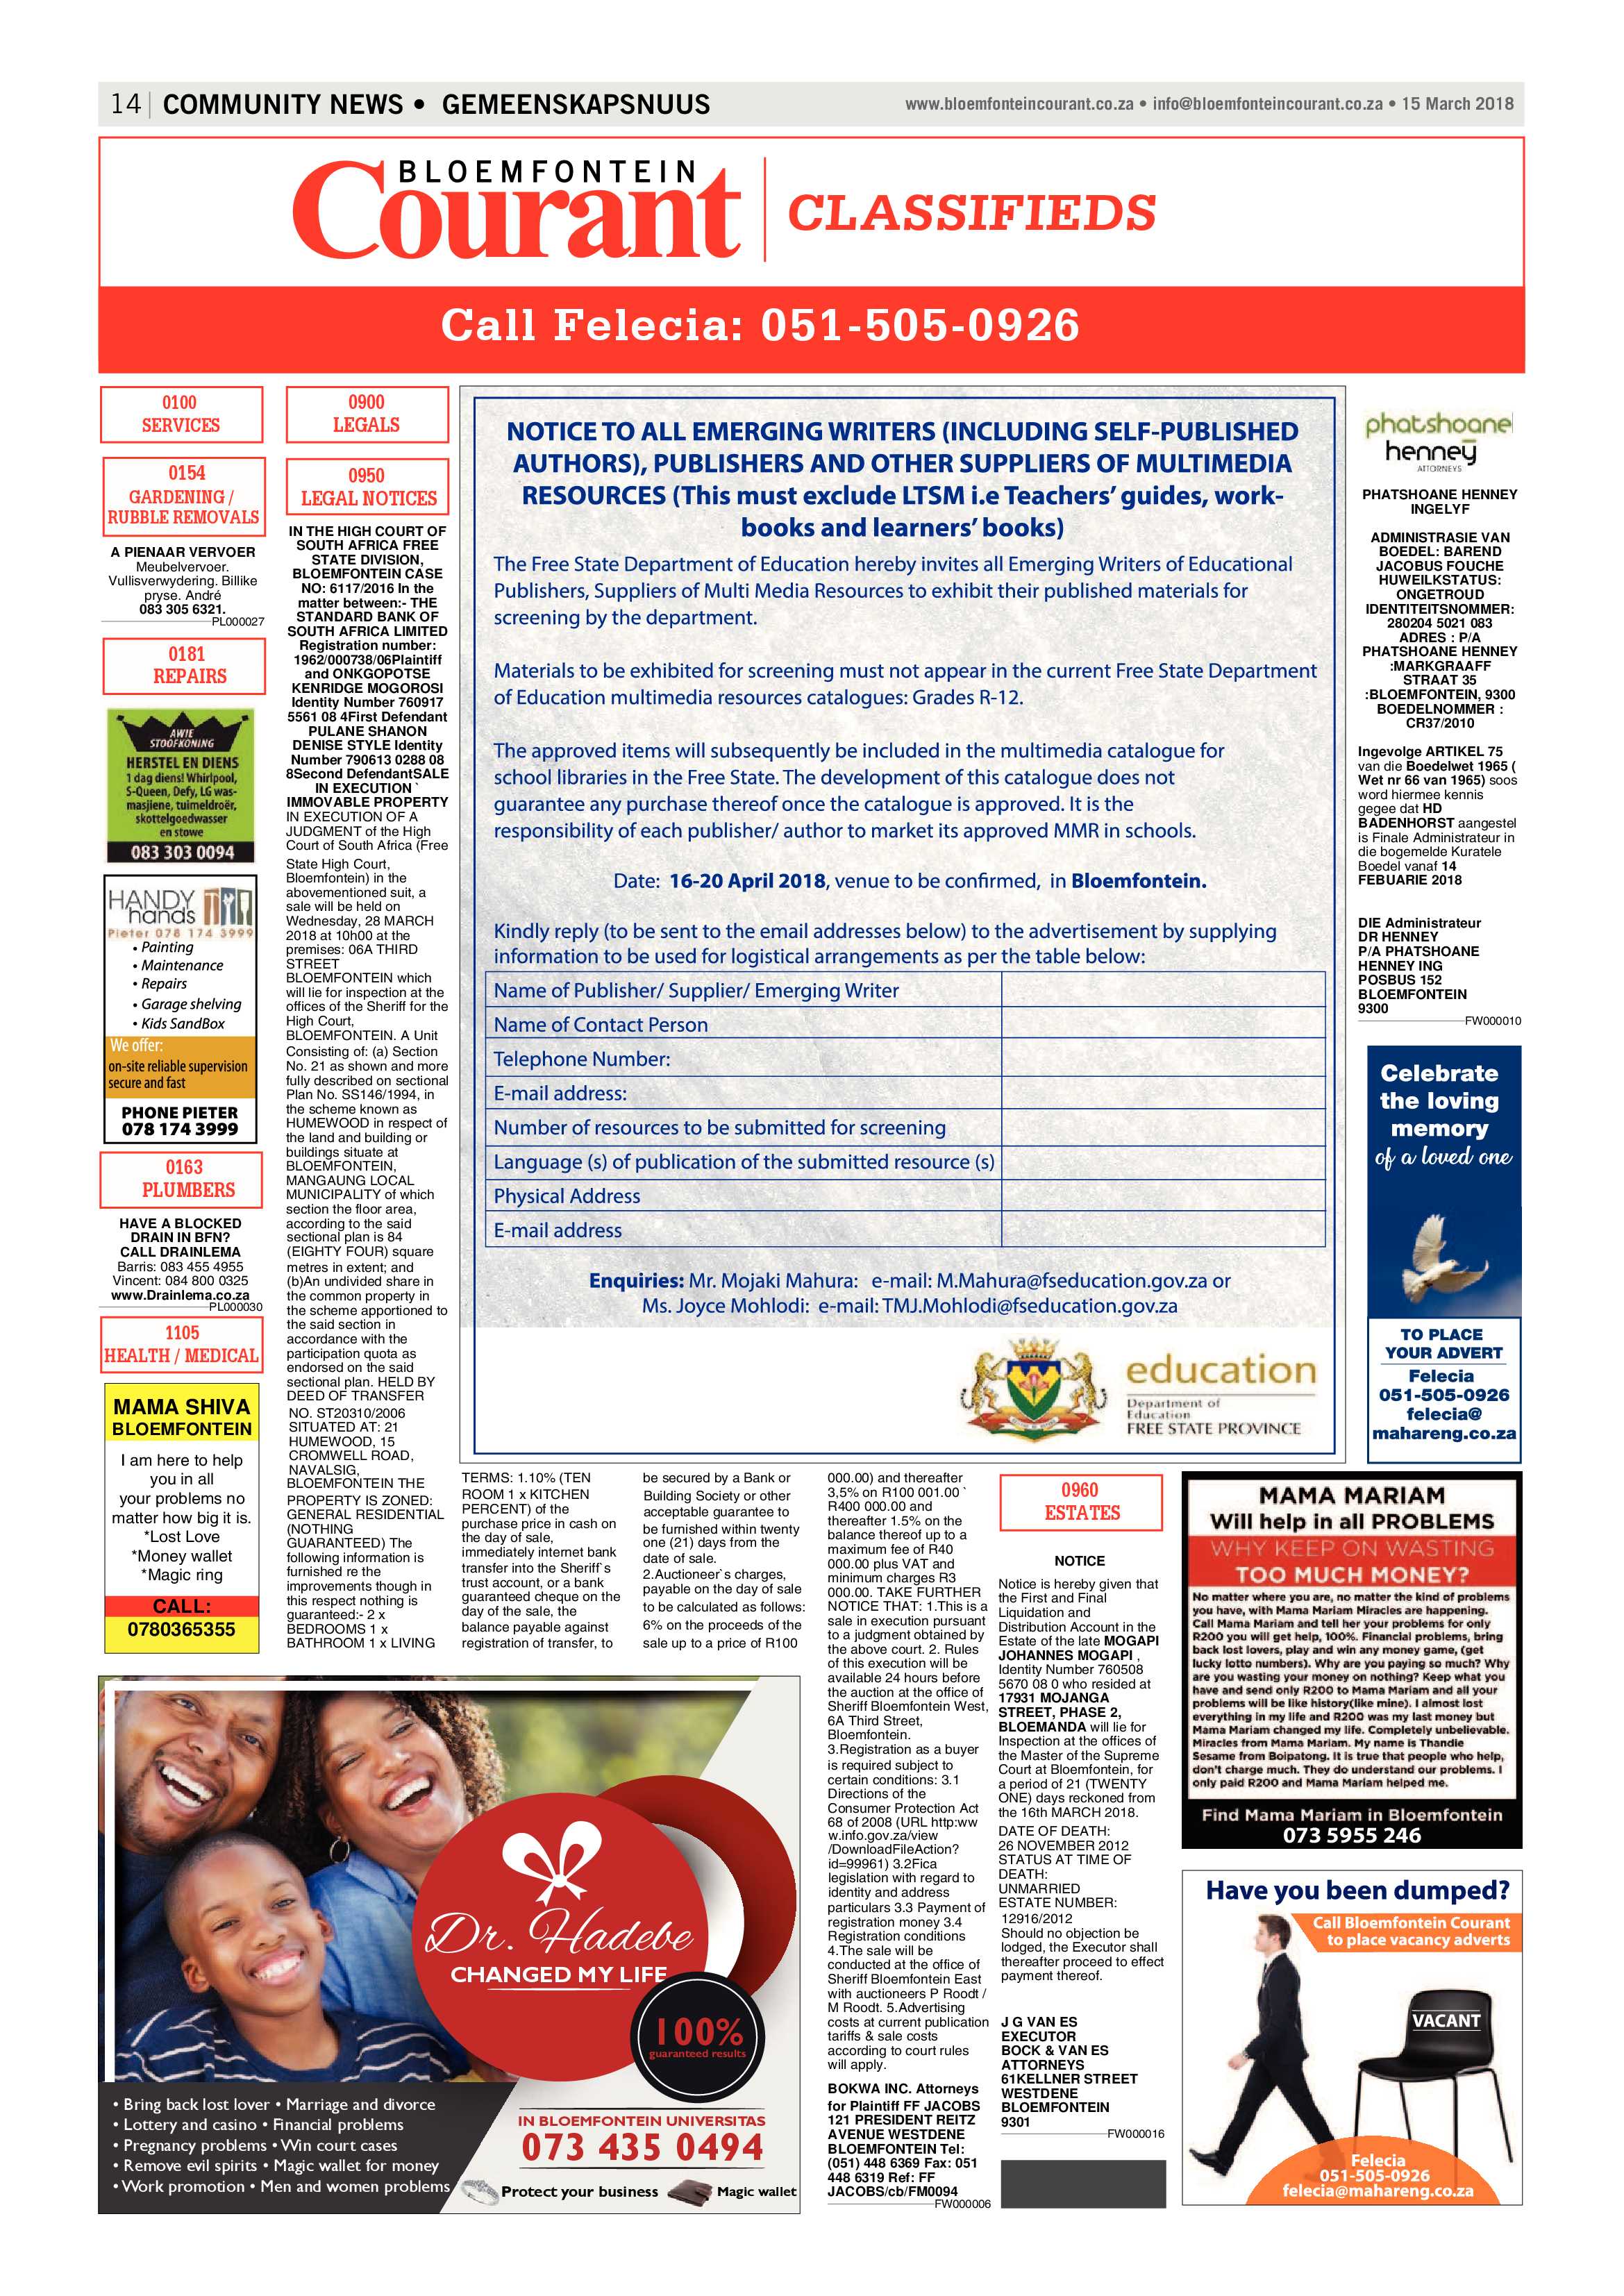 15-march-2018-bloemfontein-courant-epapers-page-14